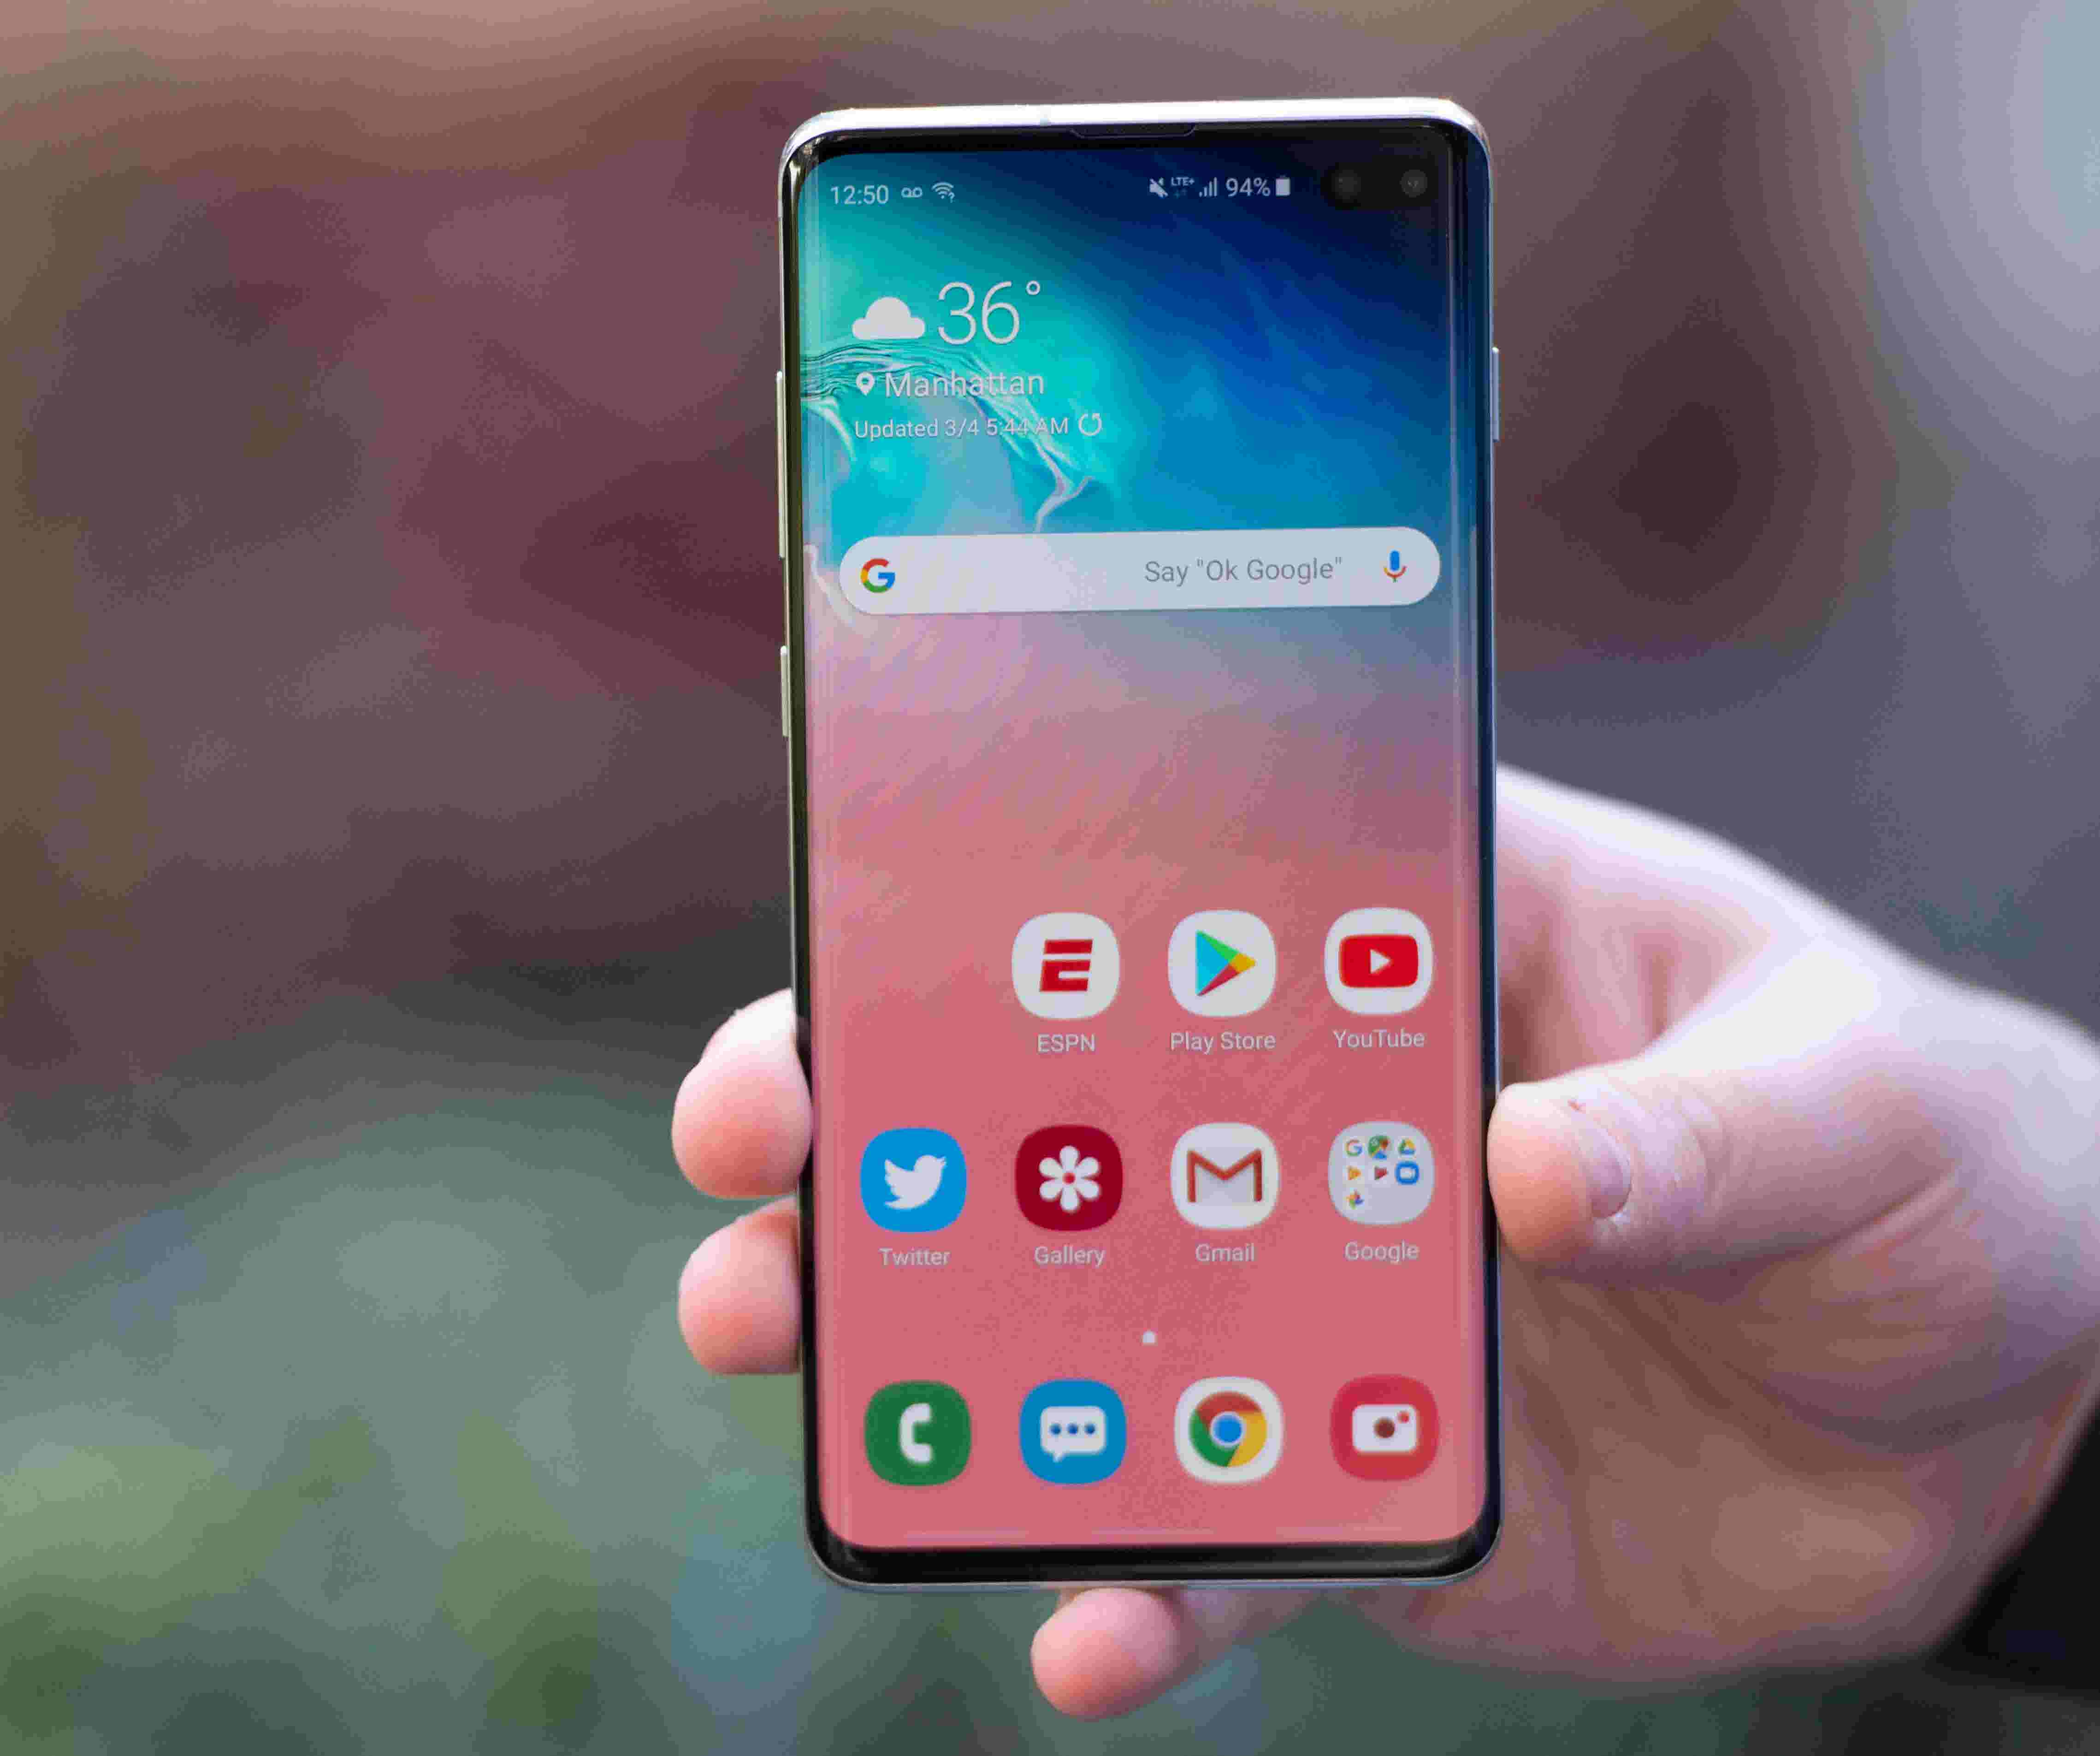 Samsung Galaxy S10+ Here are three of the coolest new features